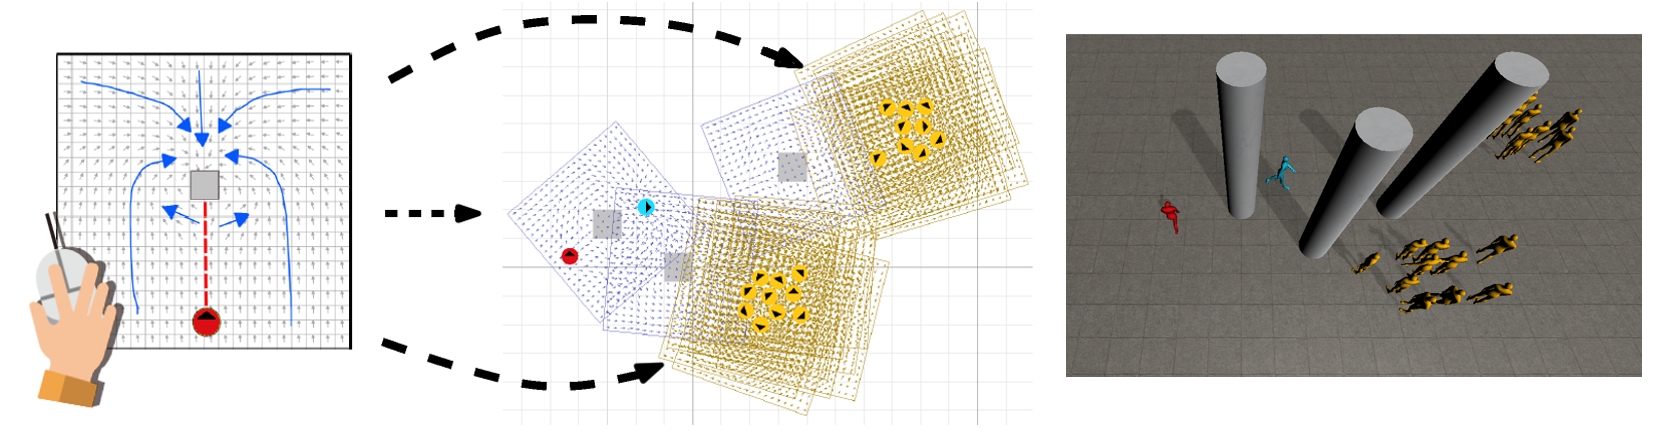 We present interaction fields (IFs) for sketch-based design of local agent interactions in crowd simulation. Left: A user sketches guide curves (shown in blue), which are converted to an IF grid.
The purpose of this specific IF is to let agents move behind one object to hide from another. Middle: 2D top view of the simulation. We let all gray obstacles and orange agents emit this IF. The blue agent perceives these IFs, causing it to hide from the red agent. Right: 3D impression of this scenario, combined with body animation per agent.